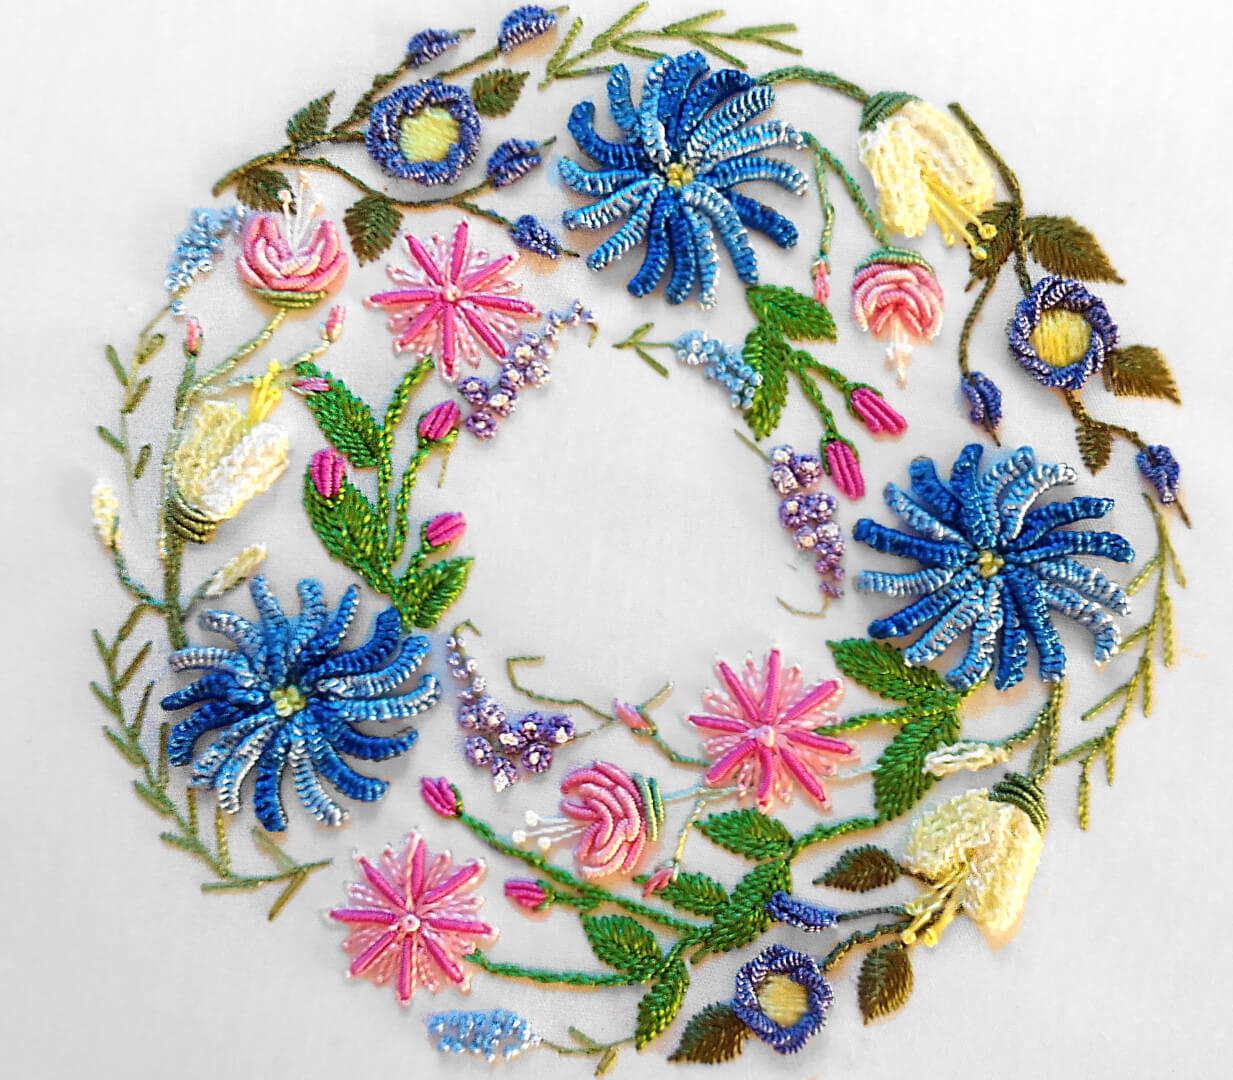 Online Class: Beginning Brazilian Dimensional Embroidery with Judy Caruso